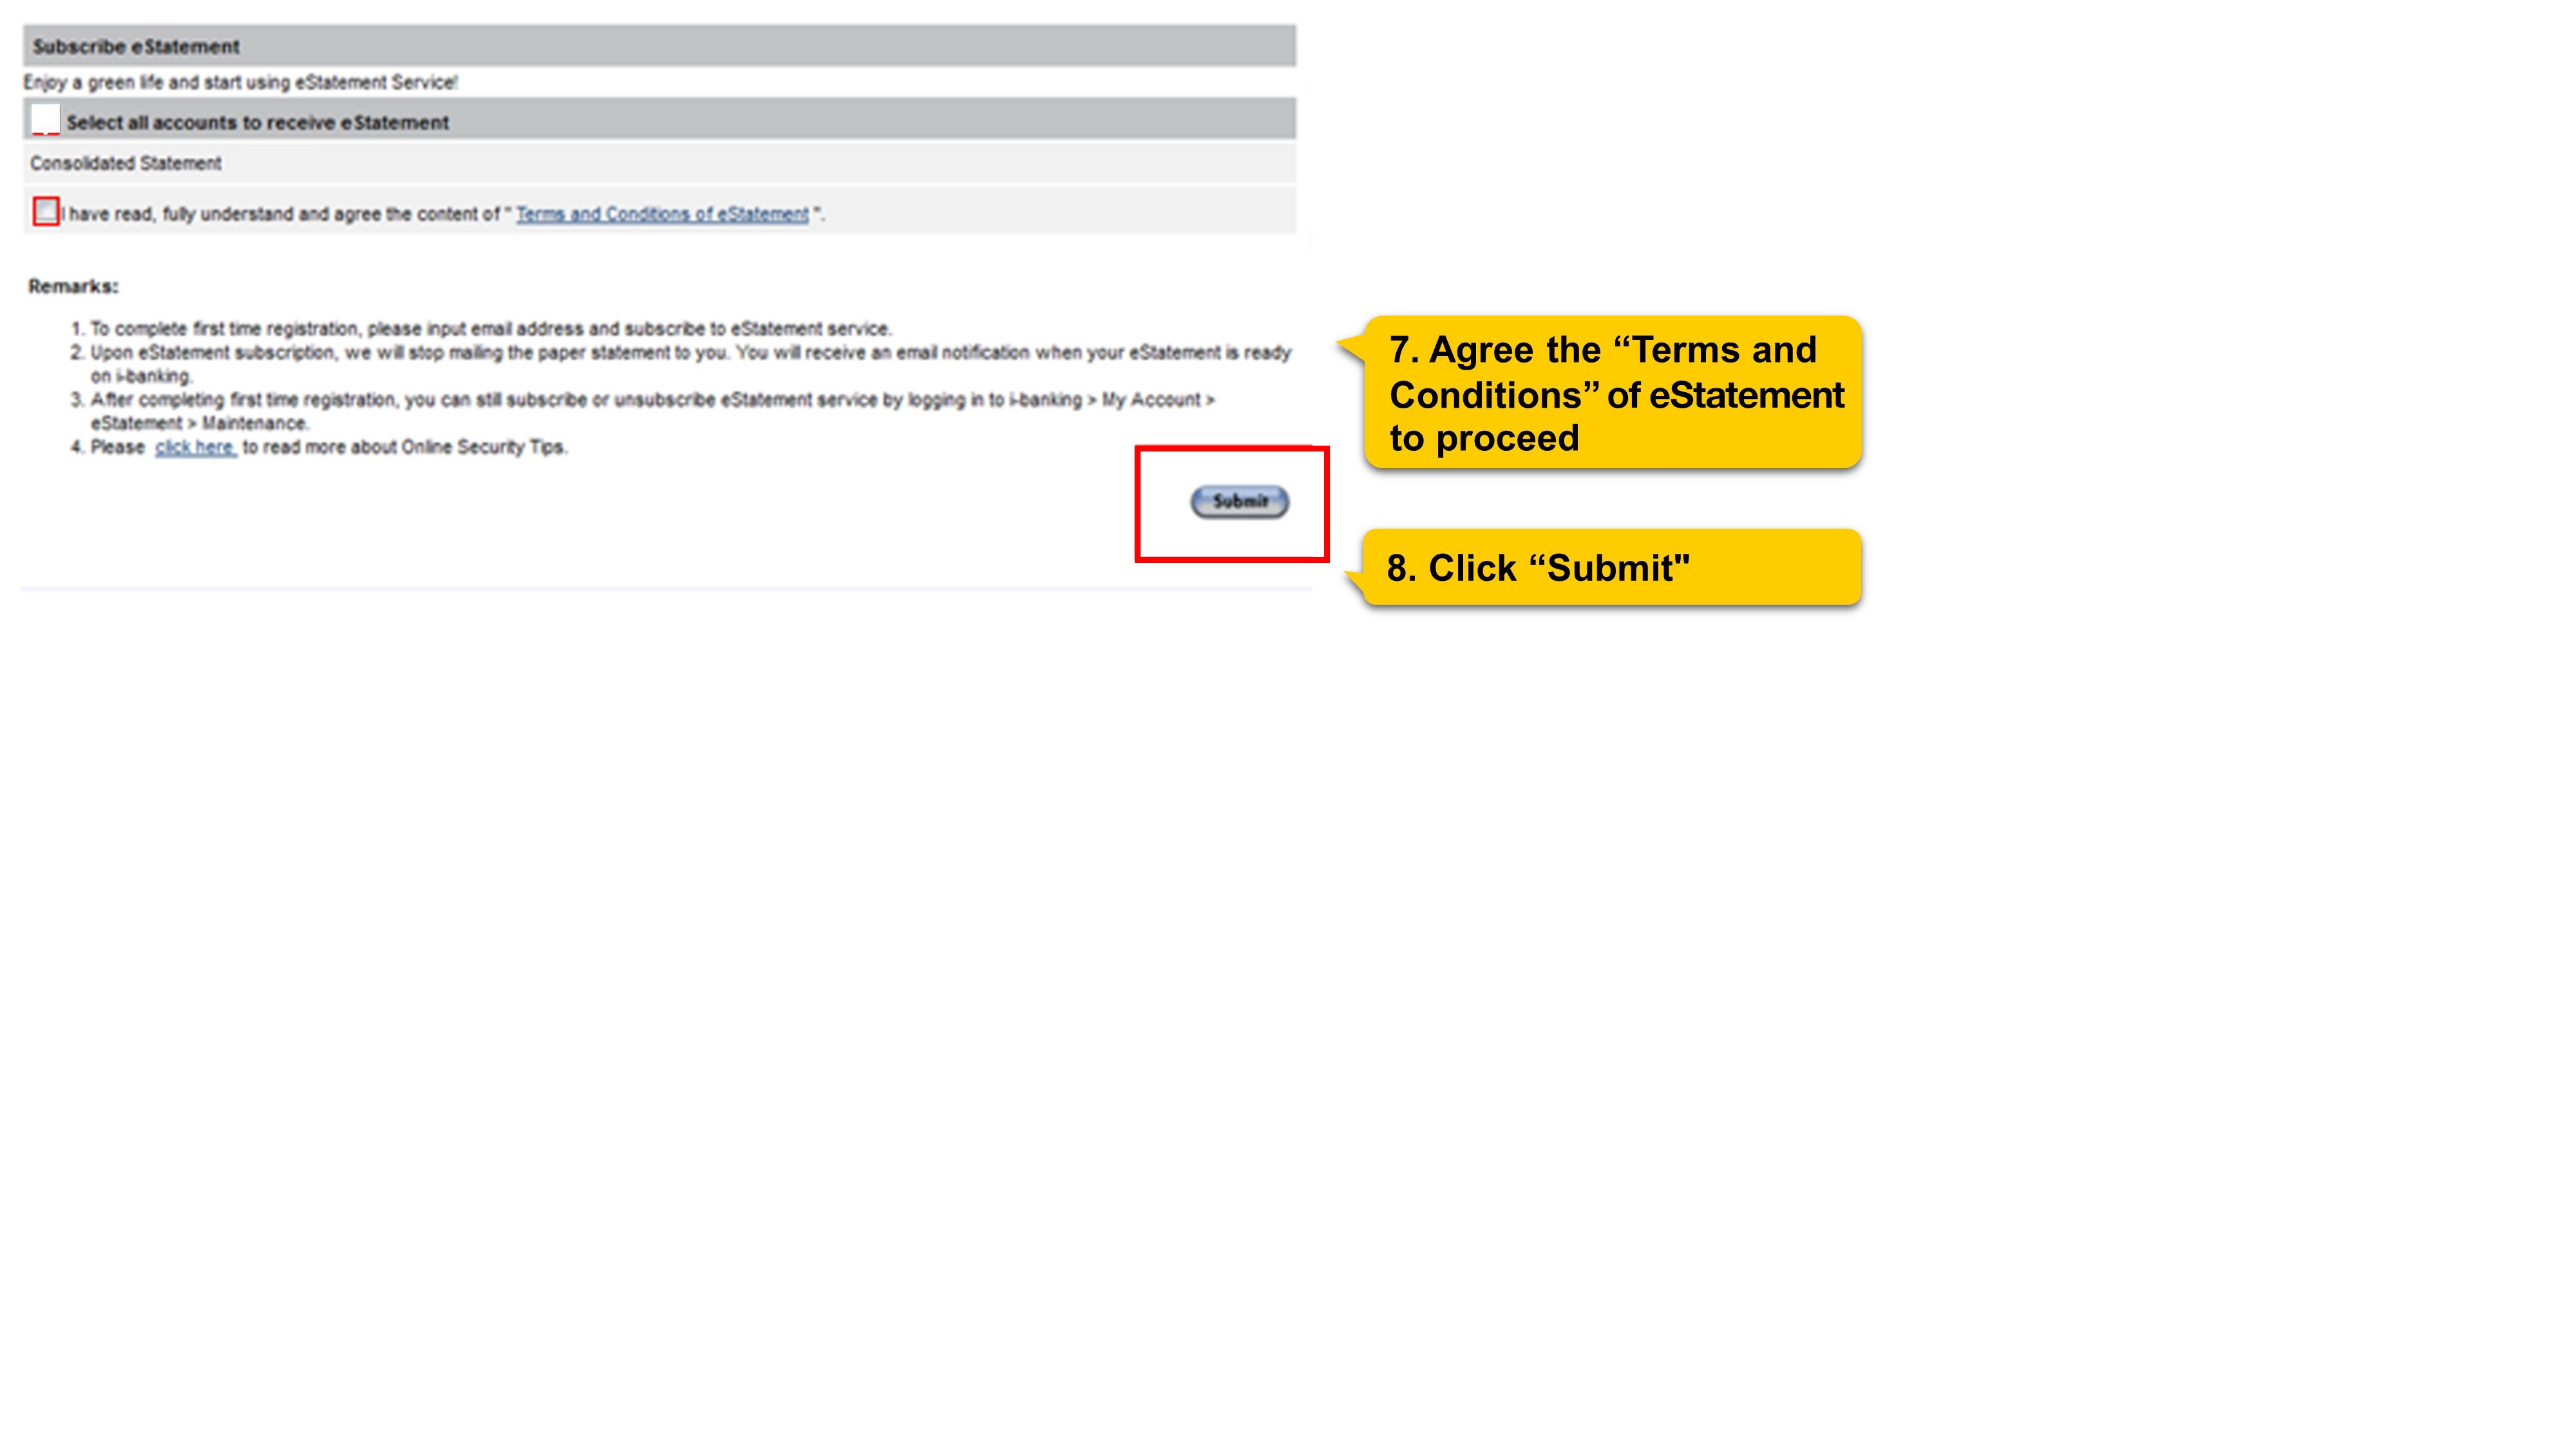 7. Agree the "Terms and Conditions" of eStatement to proceed 8. Click "Submit"